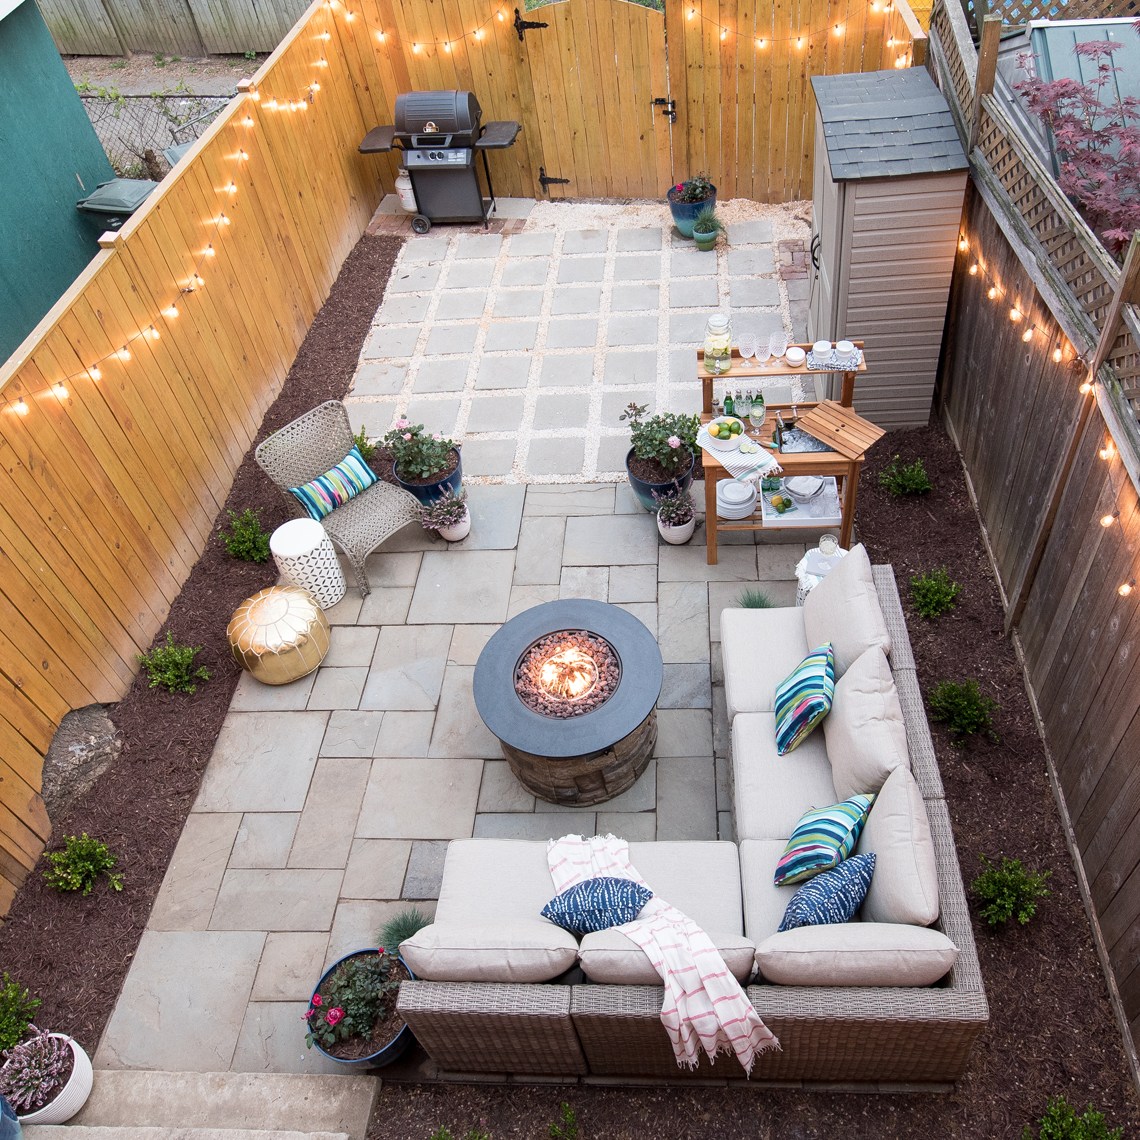 Stunning & Inspiring Outdoor Fire Pit Areas | The Happy Housie